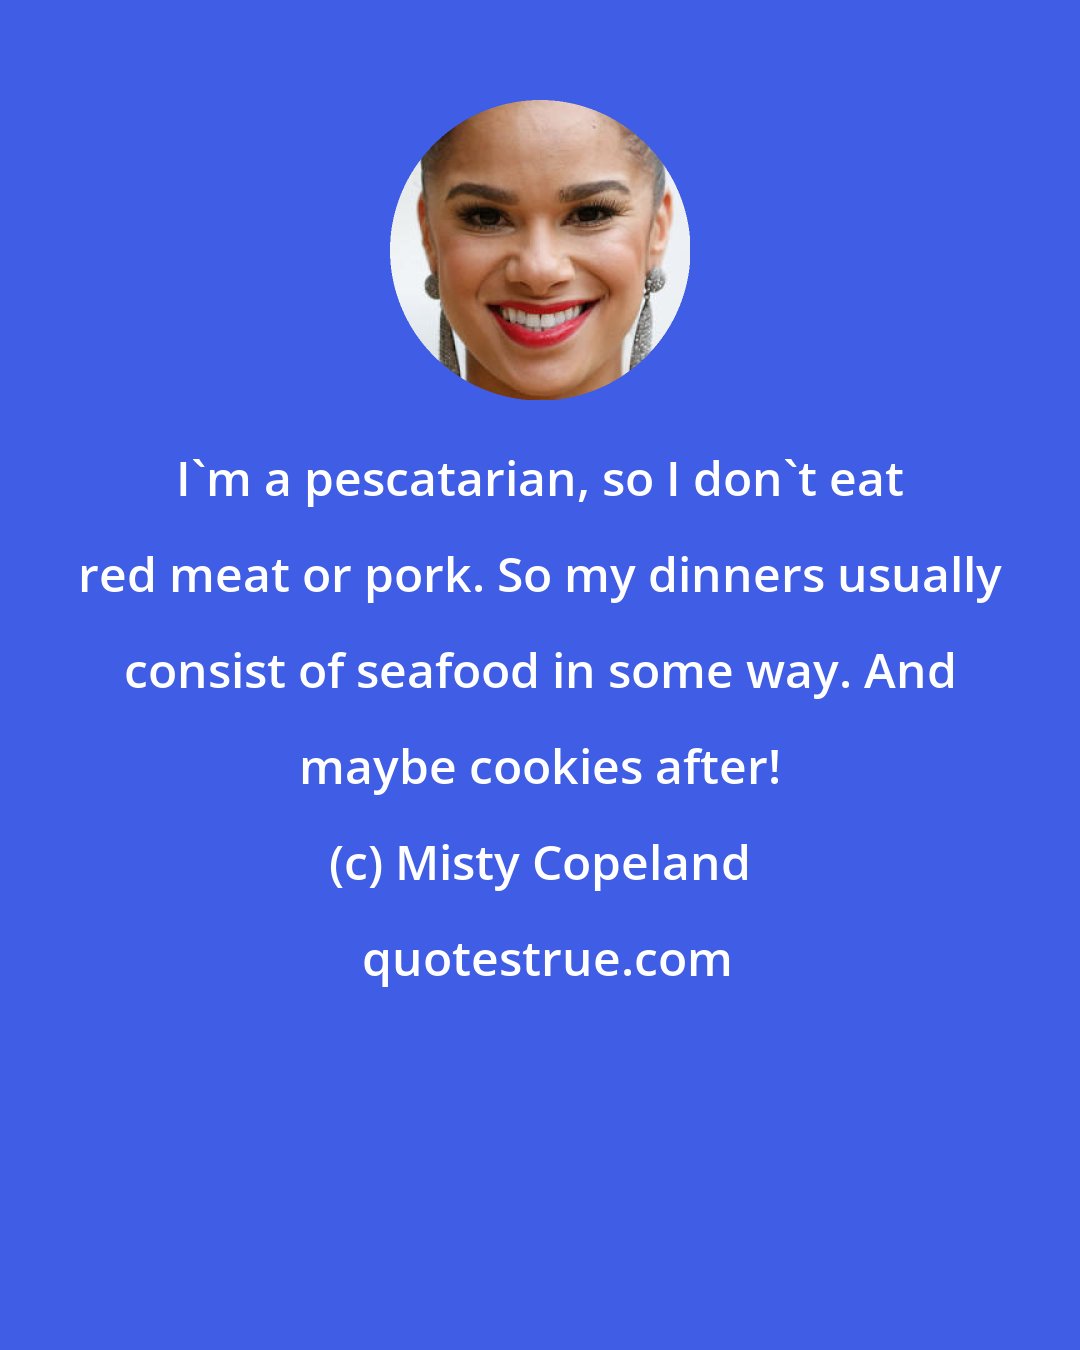 Misty Copeland: I'm a pescatarian, so I don't eat red meat or pork. So my dinners usually consist of seafood in some way. And maybe cookies after!